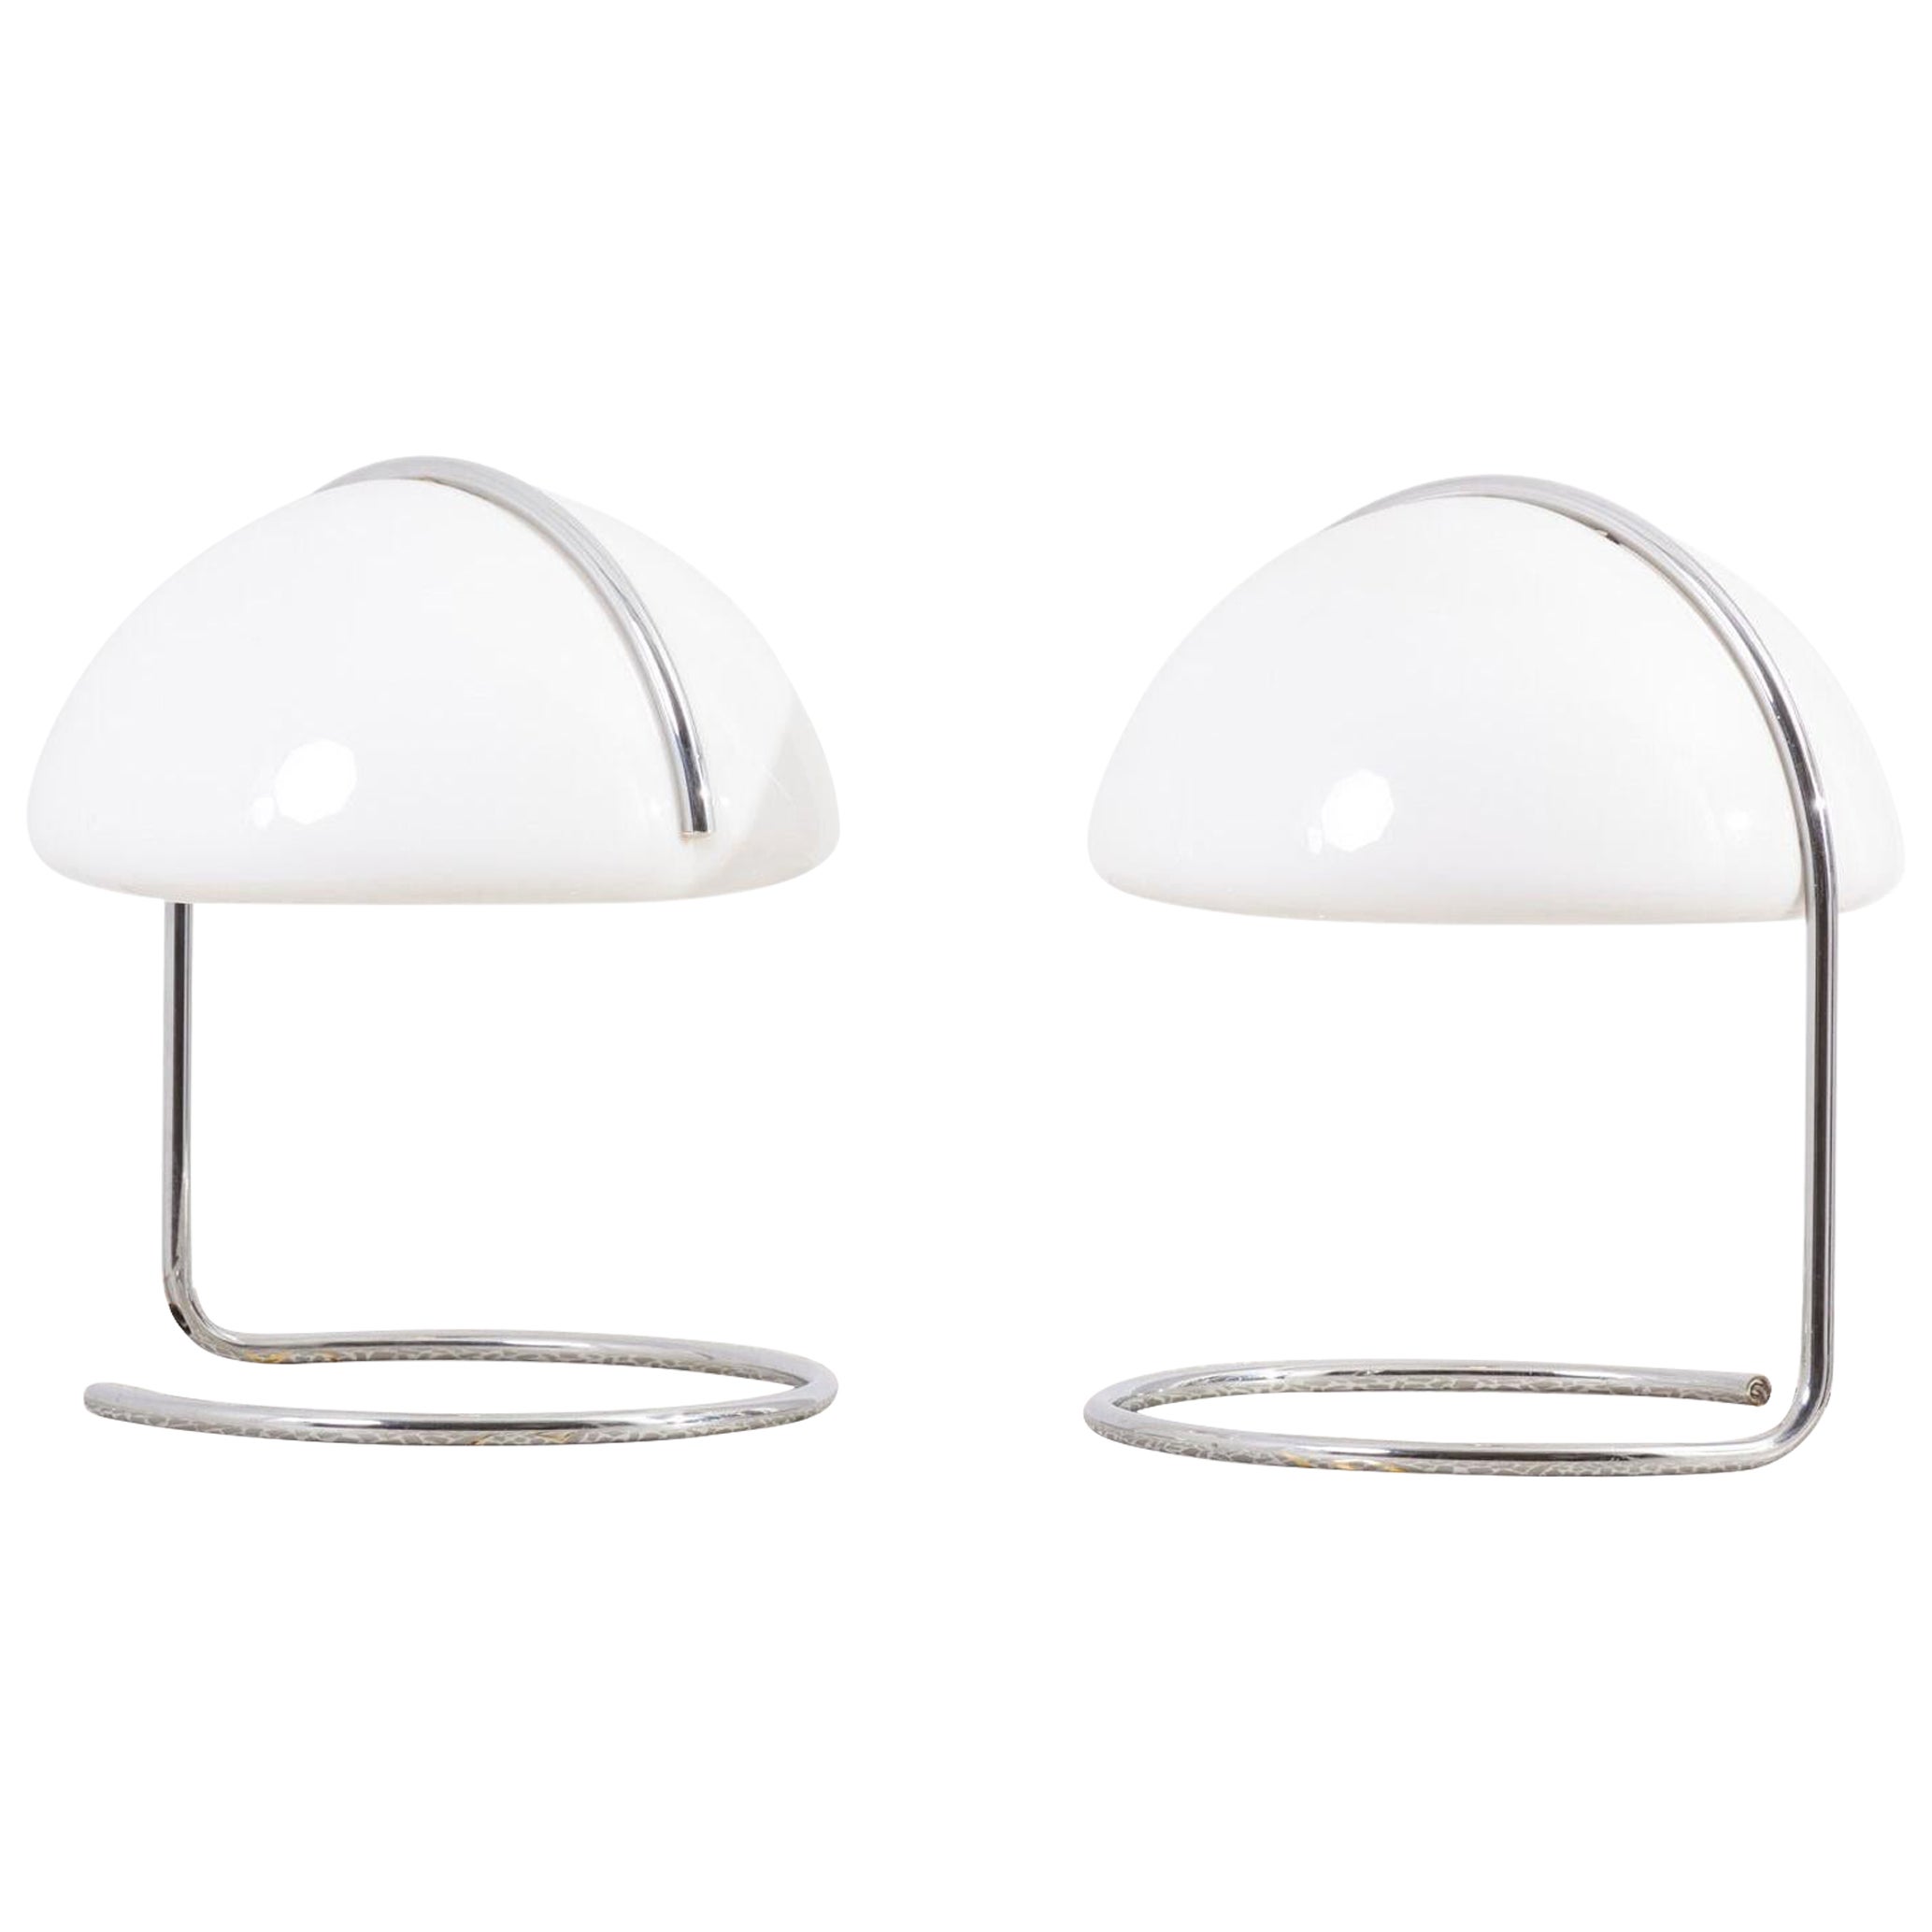 Pair of Table Lamps by Luigi Massoni & Luciano Buttura for Harvey Guzzini, Italy